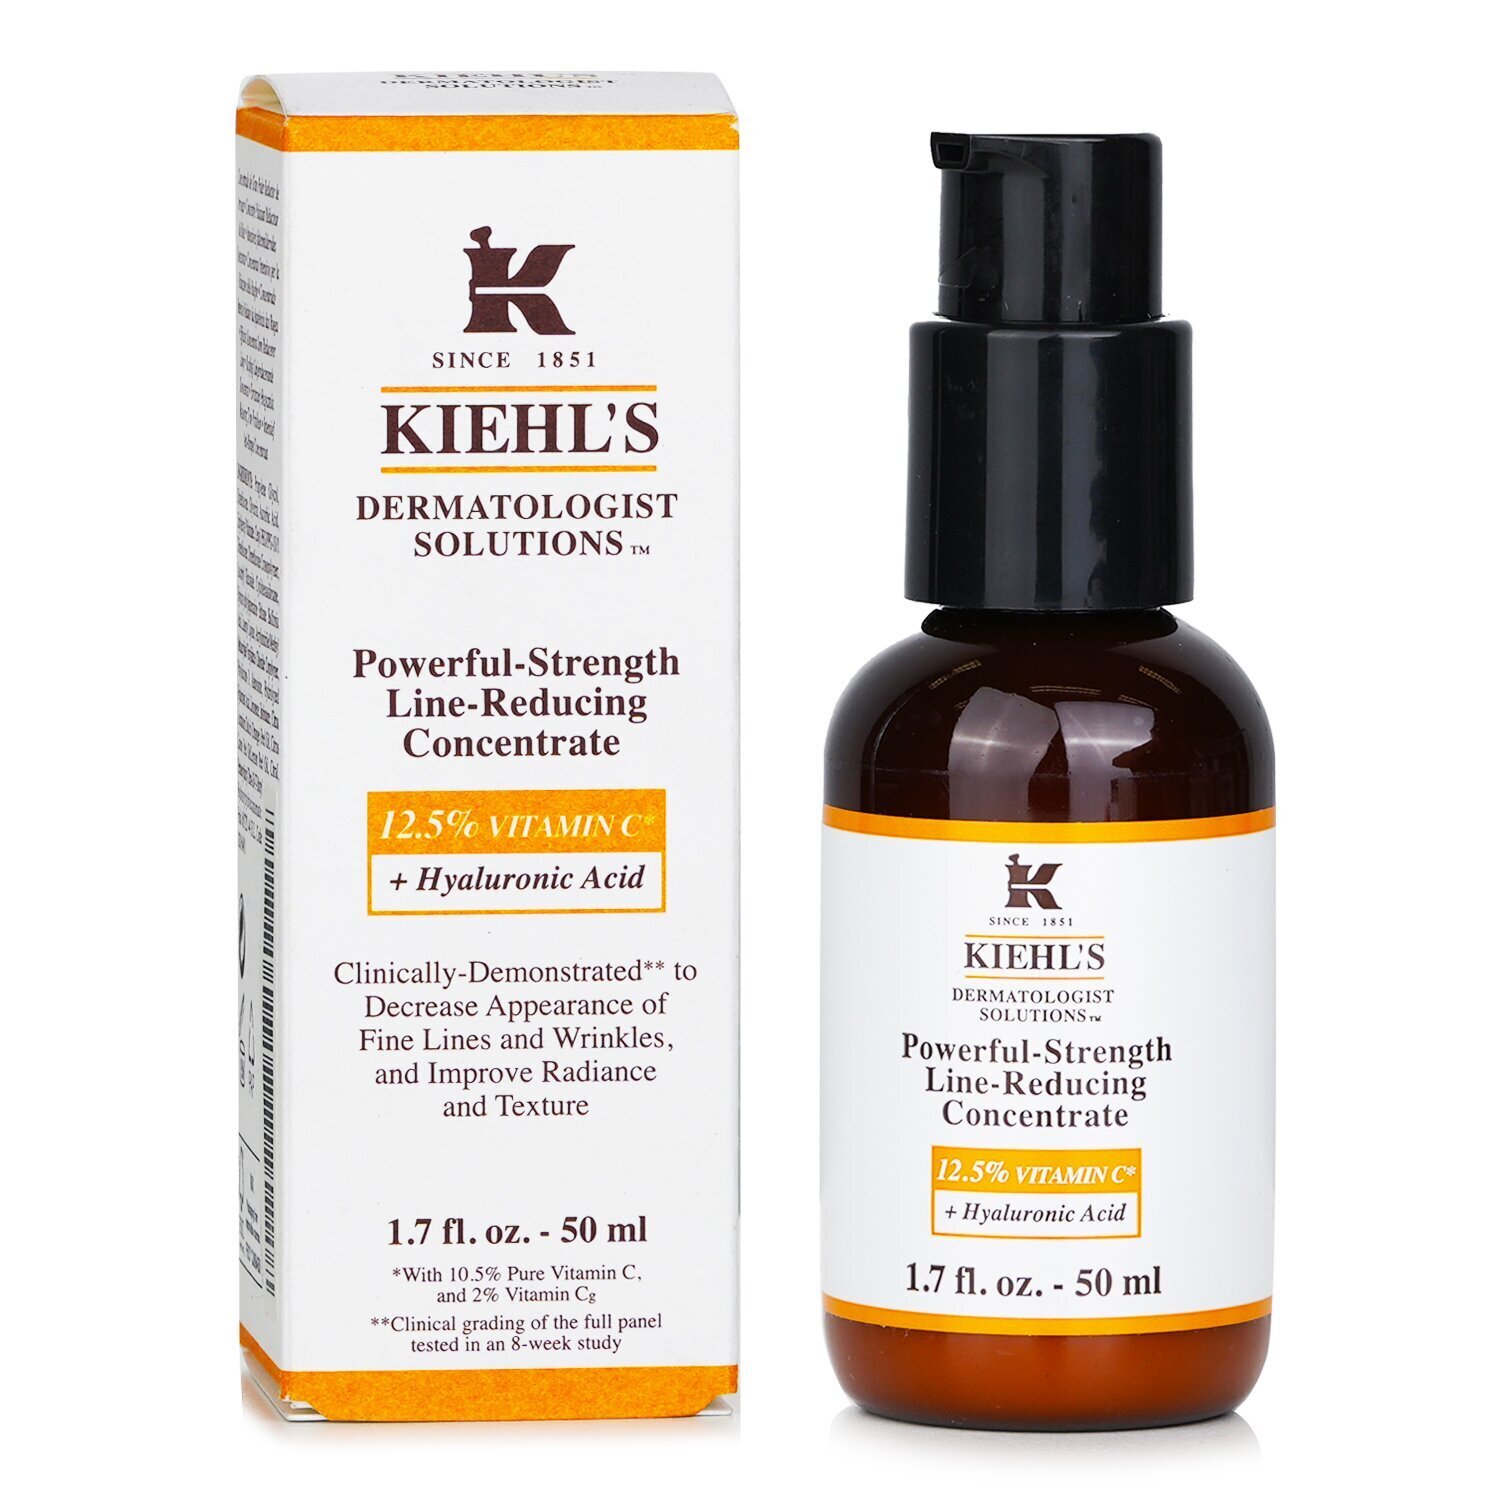 Kiehl's Dermatologist Solutions Powerful-Strength Line-Reducing Concentrate (With 12.5% Vitamin C + Hyaluronic Acid) 50ml/1.7oz